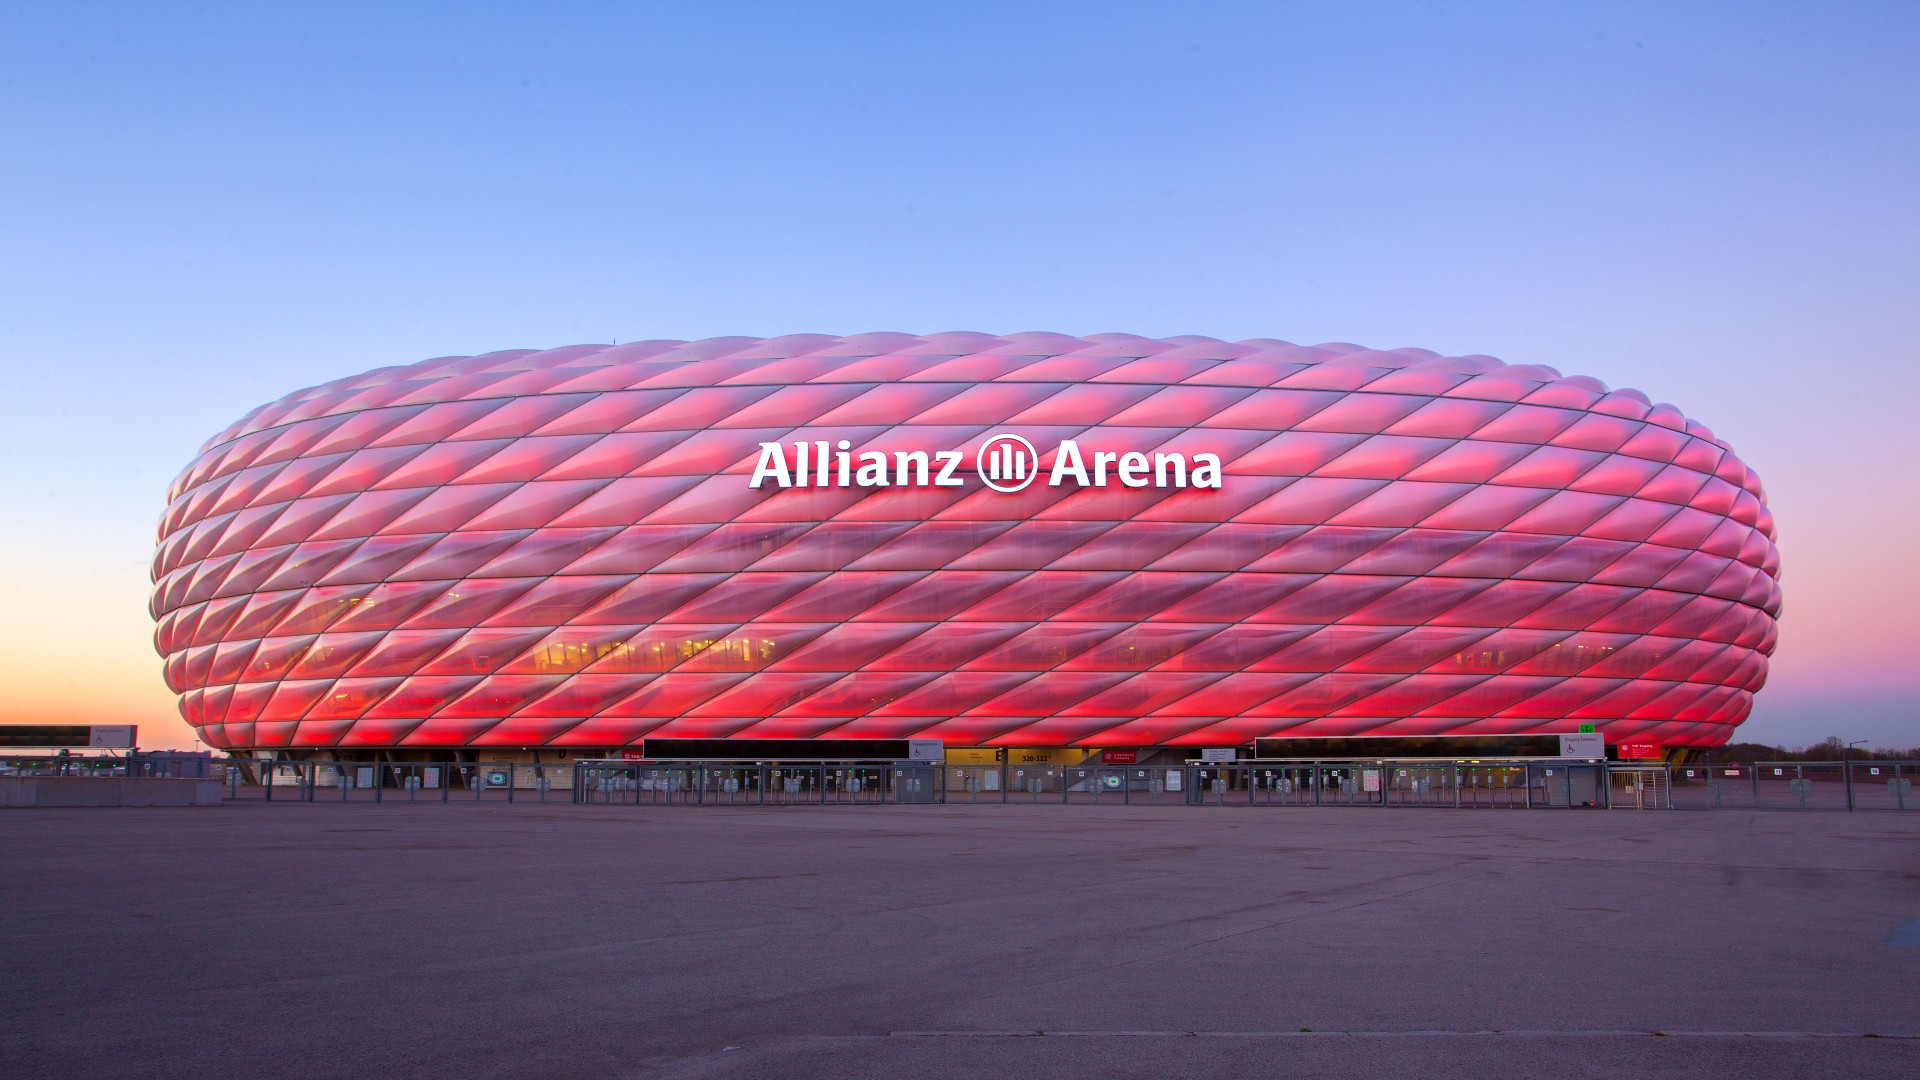 Luxury suites in the heart of the Allianz Arena - Read more on LuxuryPulse.